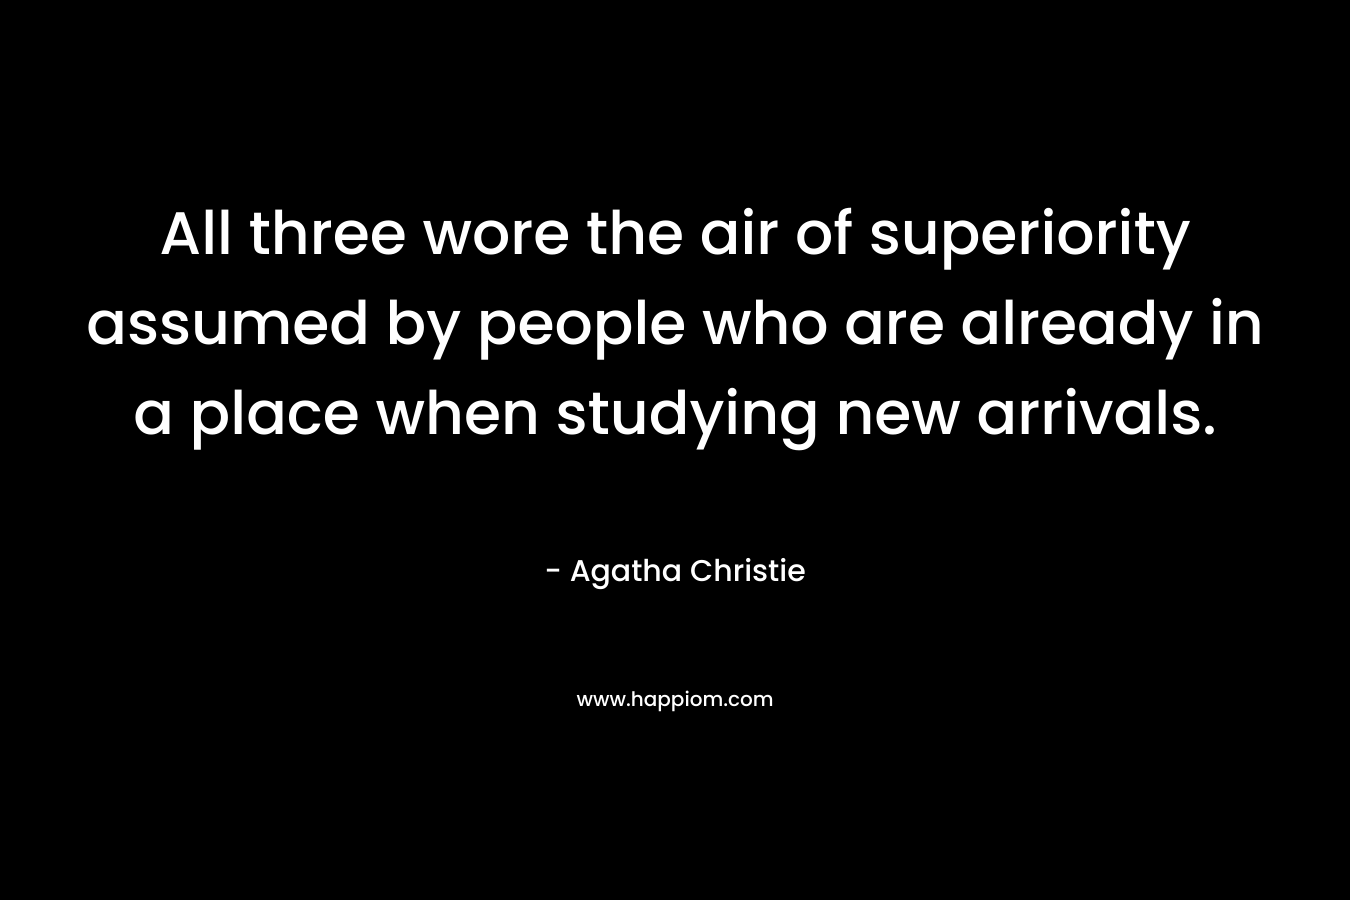 All three wore the air of superiority assumed by people who are already in a place when studying new arrivals. – Agatha Christie